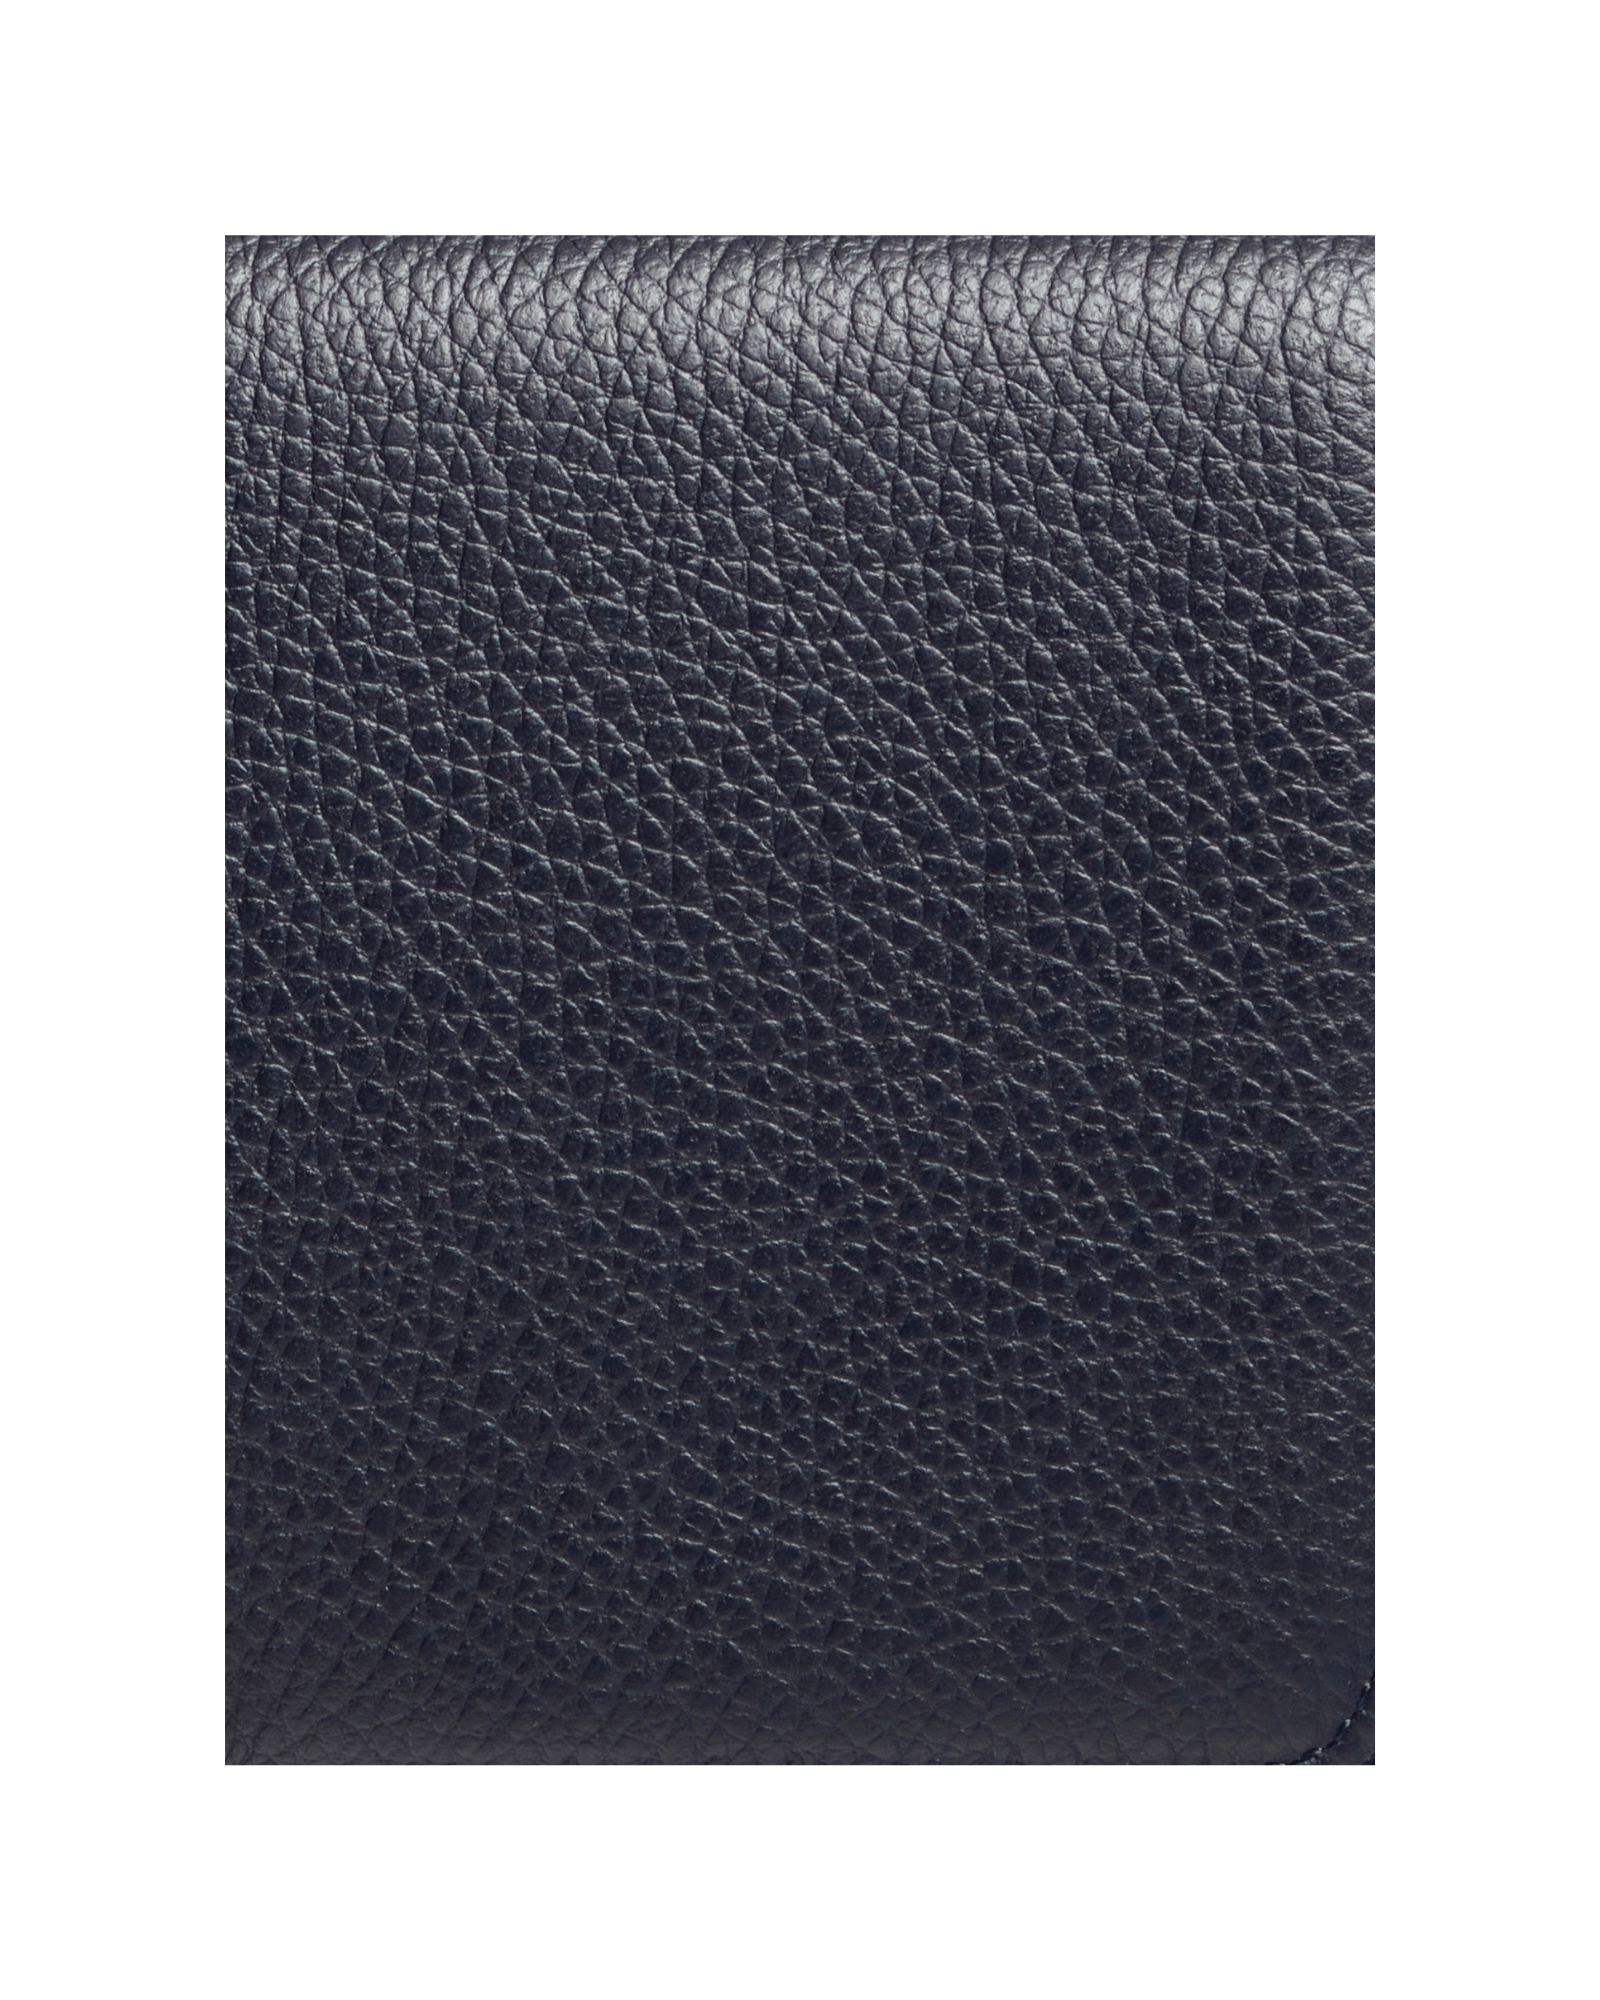 Textured Navy Leather image